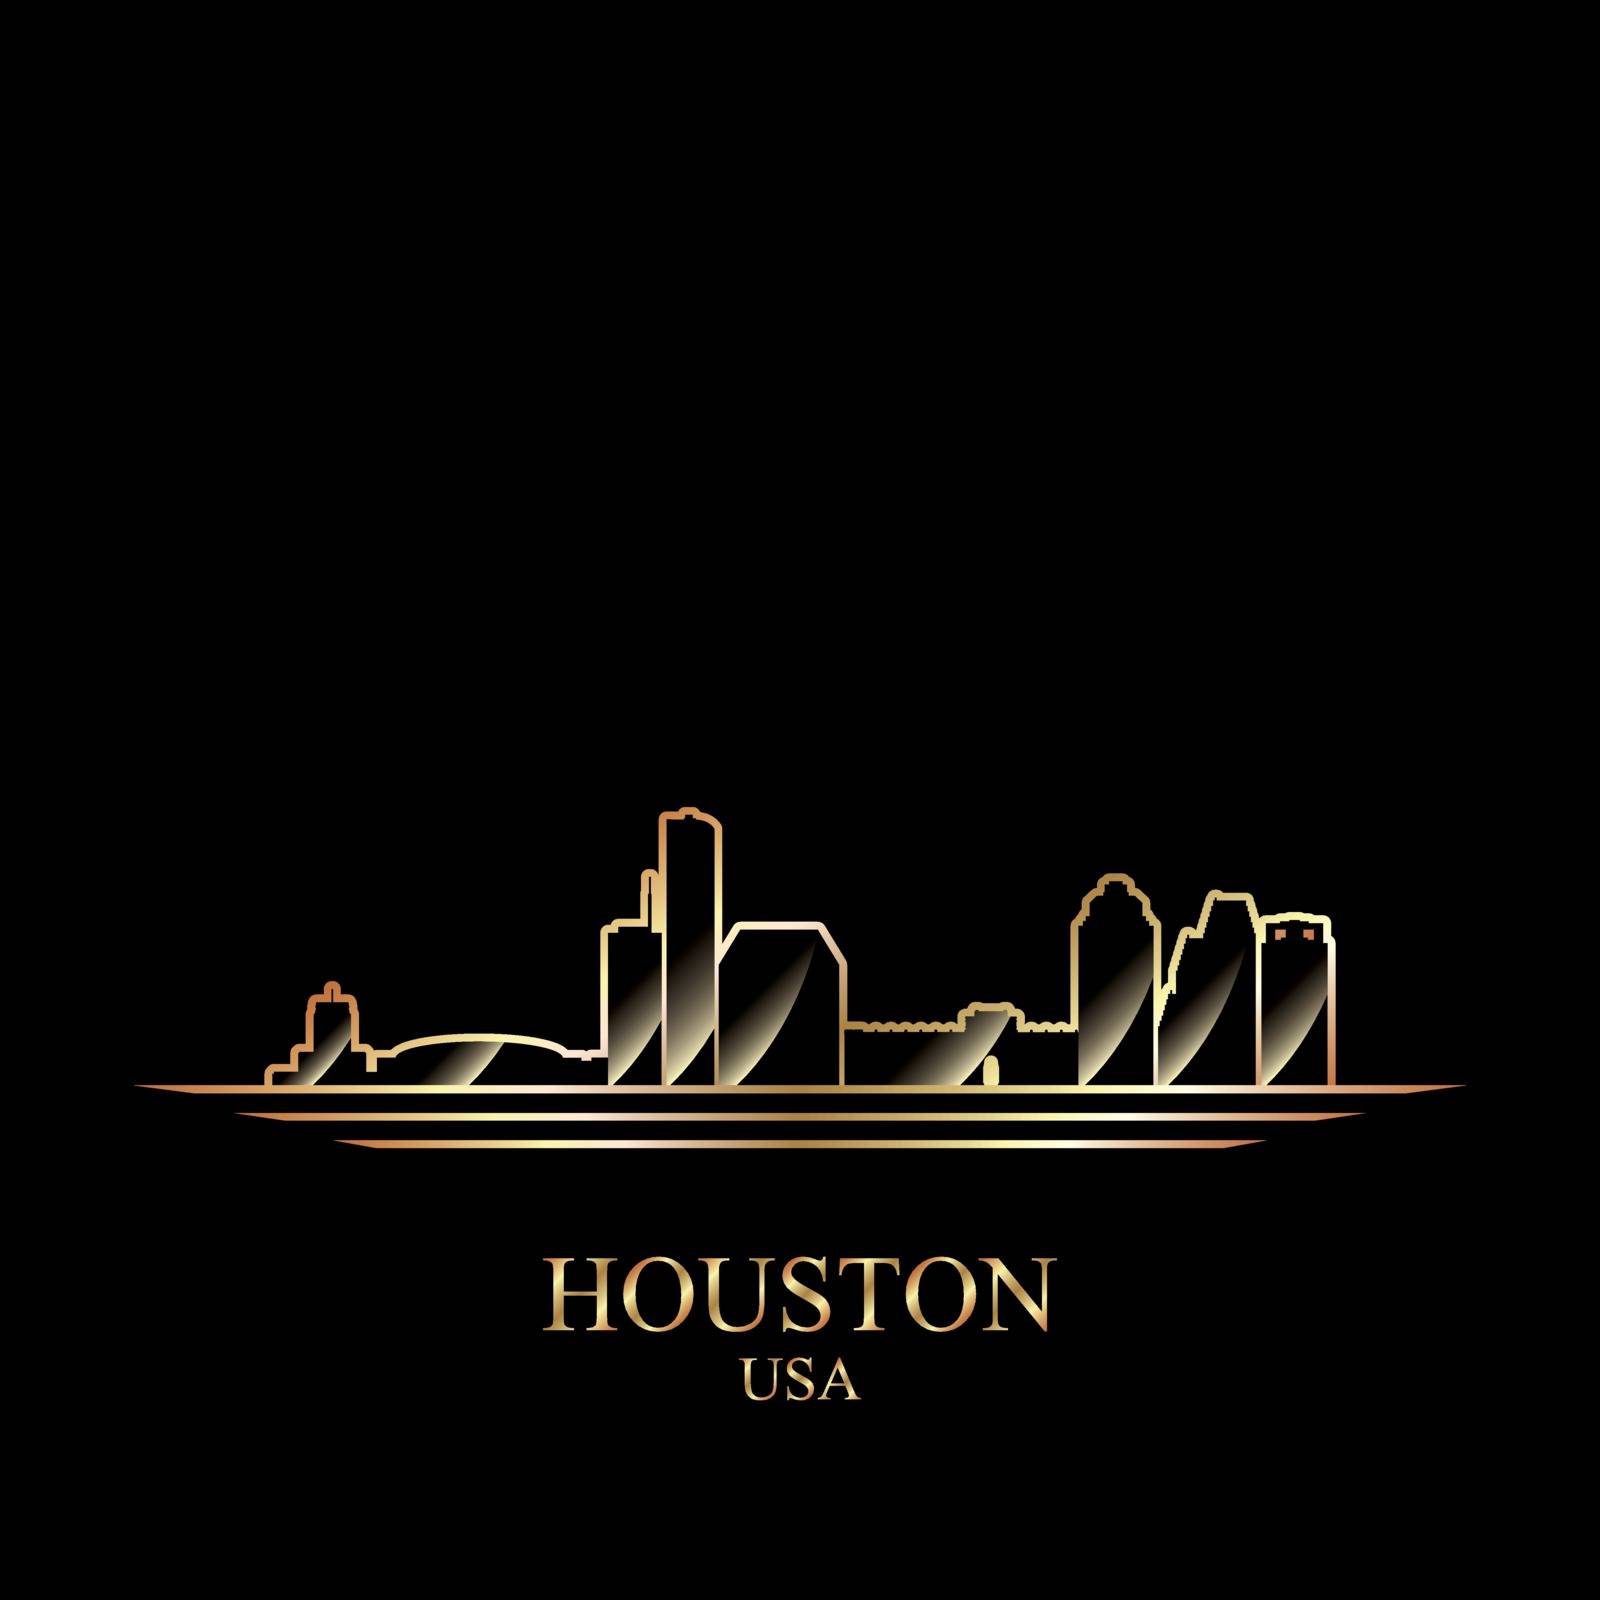 Gold silhouette of Houston on black background by Ray_of_Light